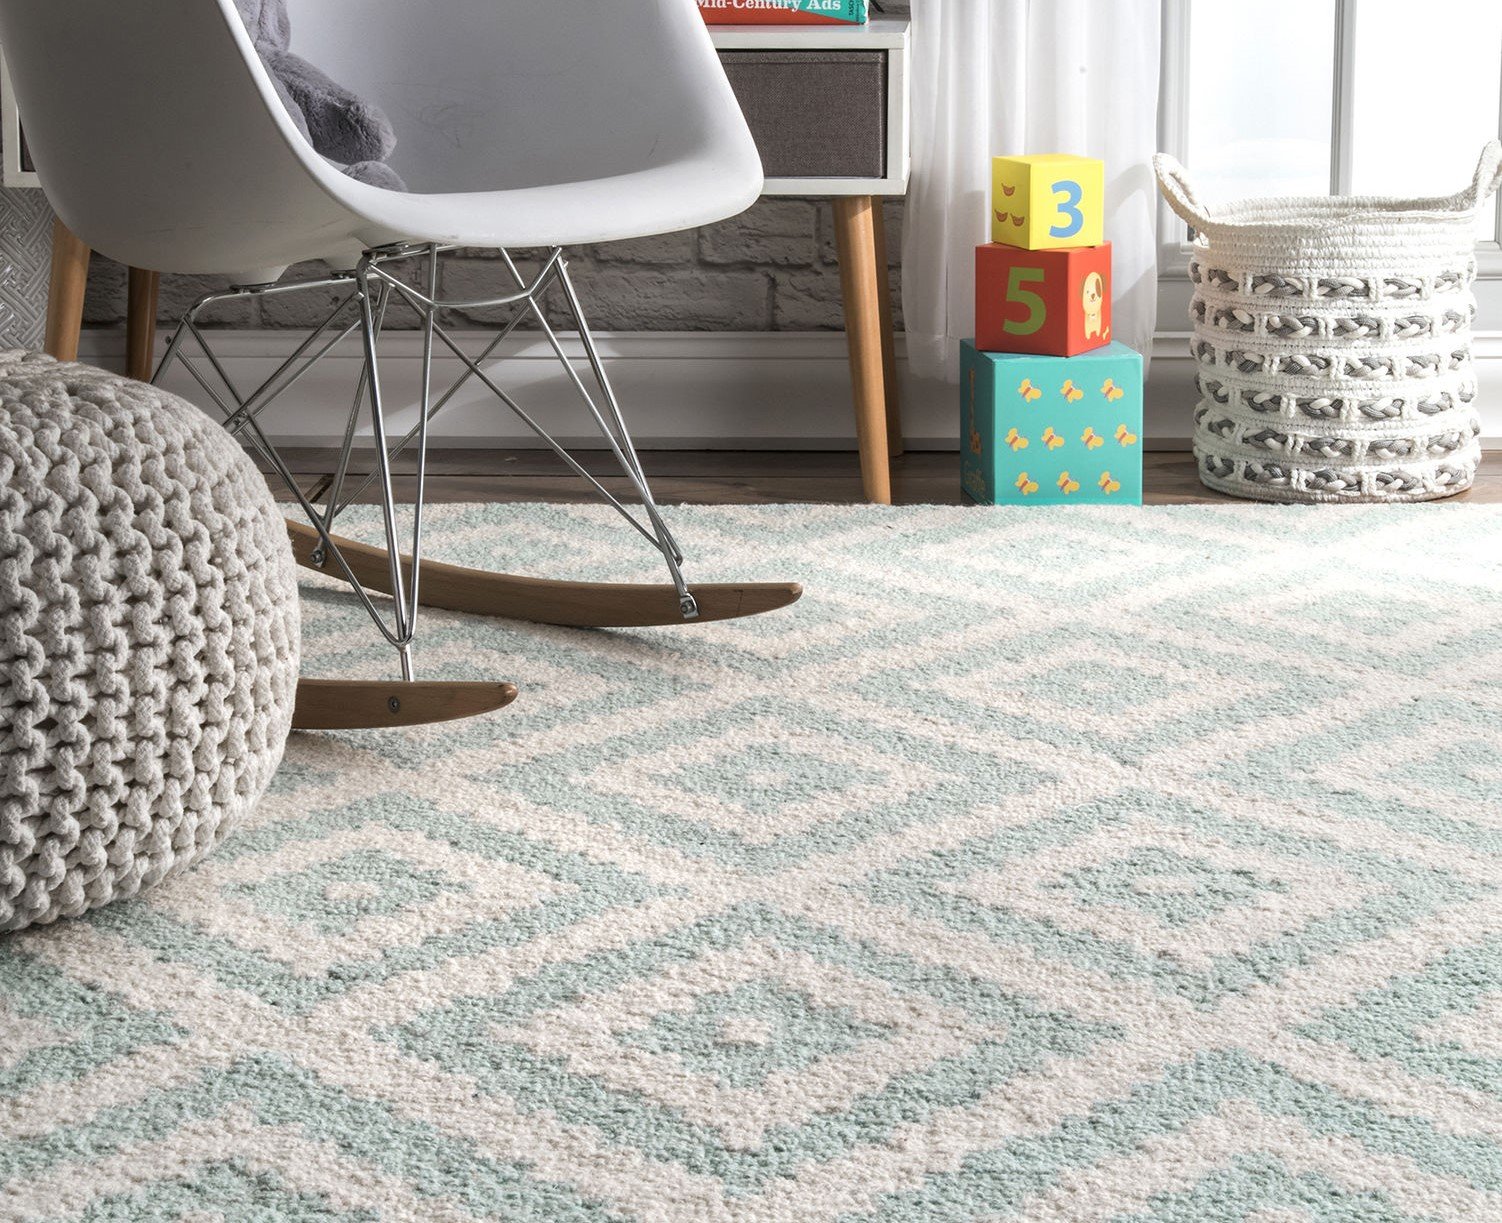 Learning How to Make Braided Rugs? Here Are Some Pitfalls to Avoid